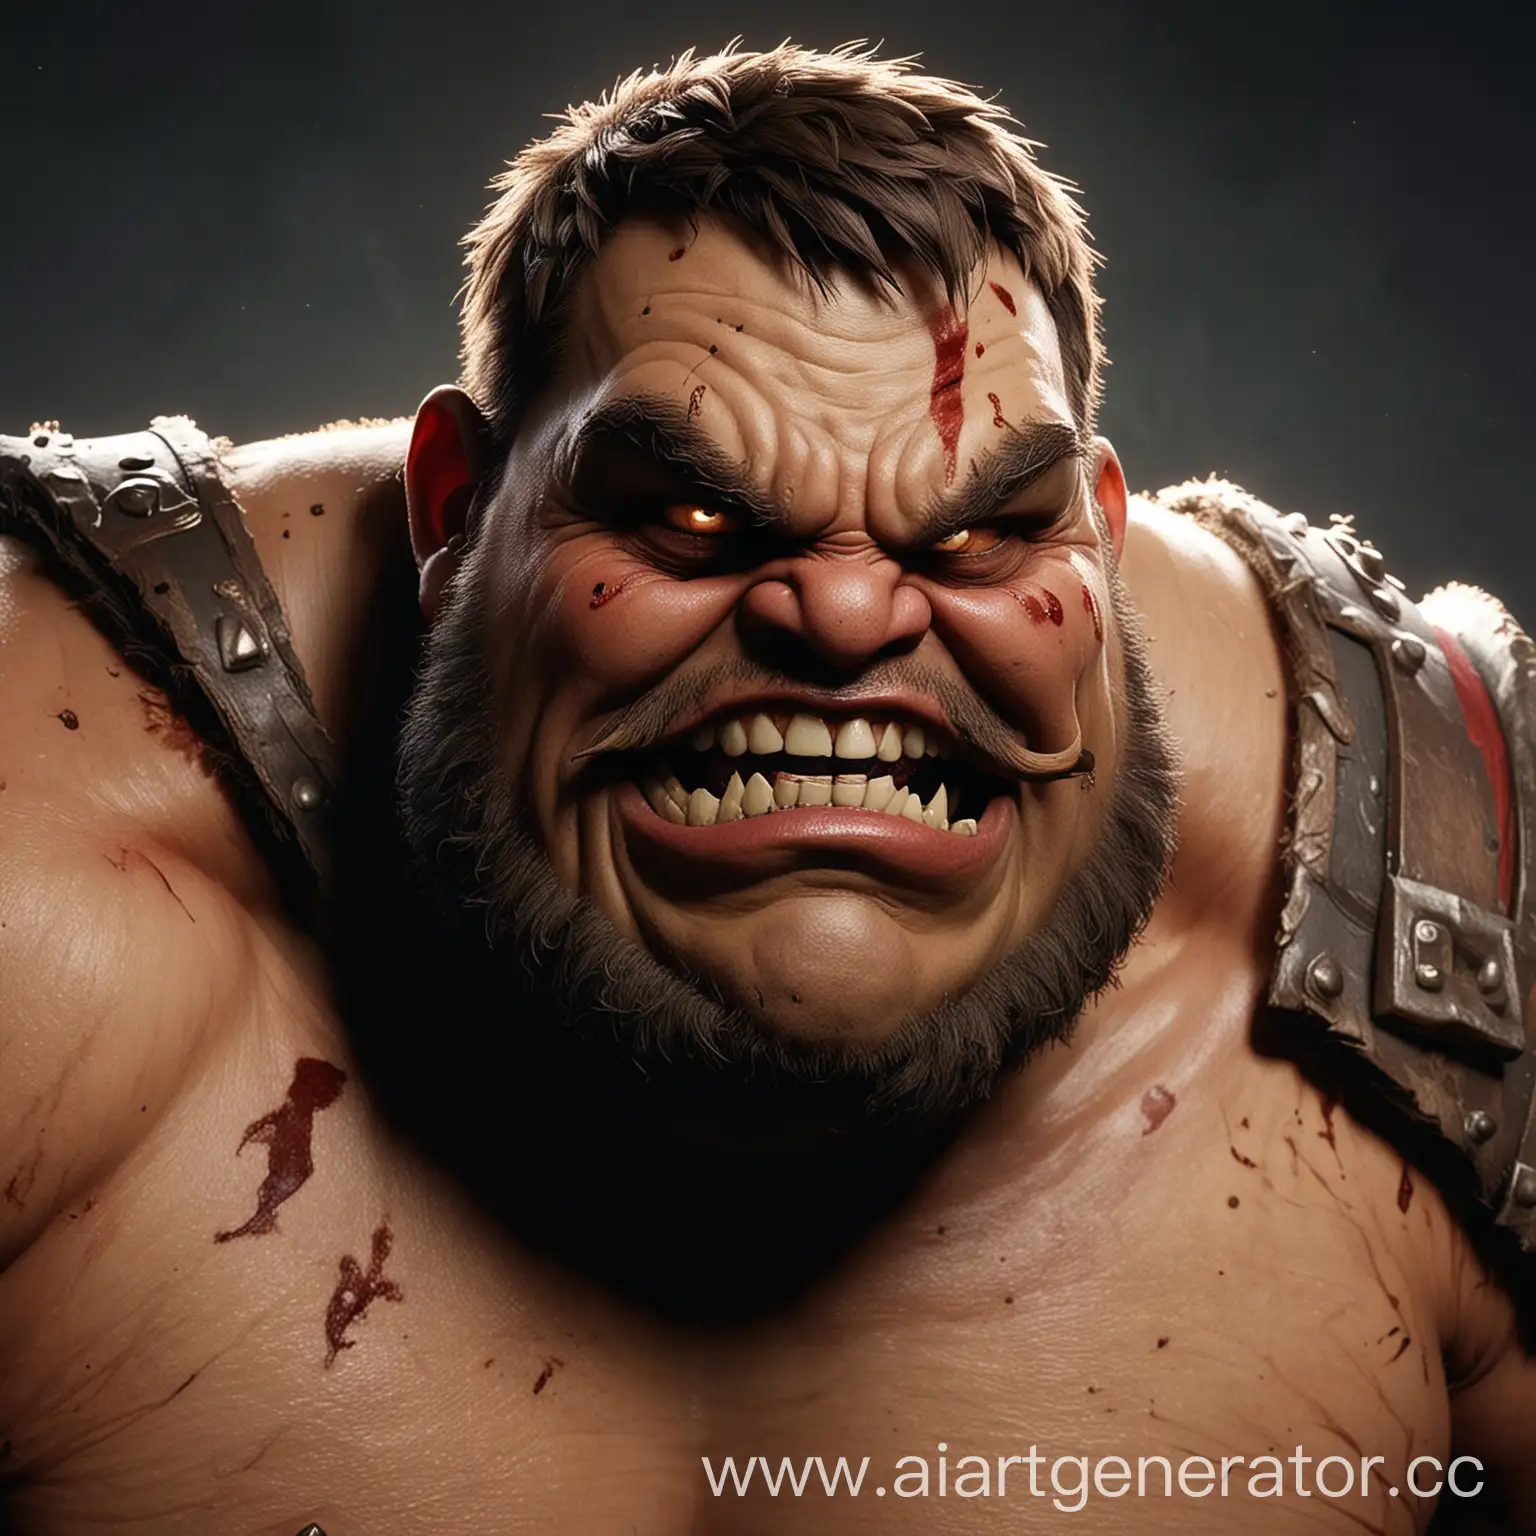 Monstrous-Dota-2-Character-Pudge-with-Huge-Hook-and-Aggressive-Stare